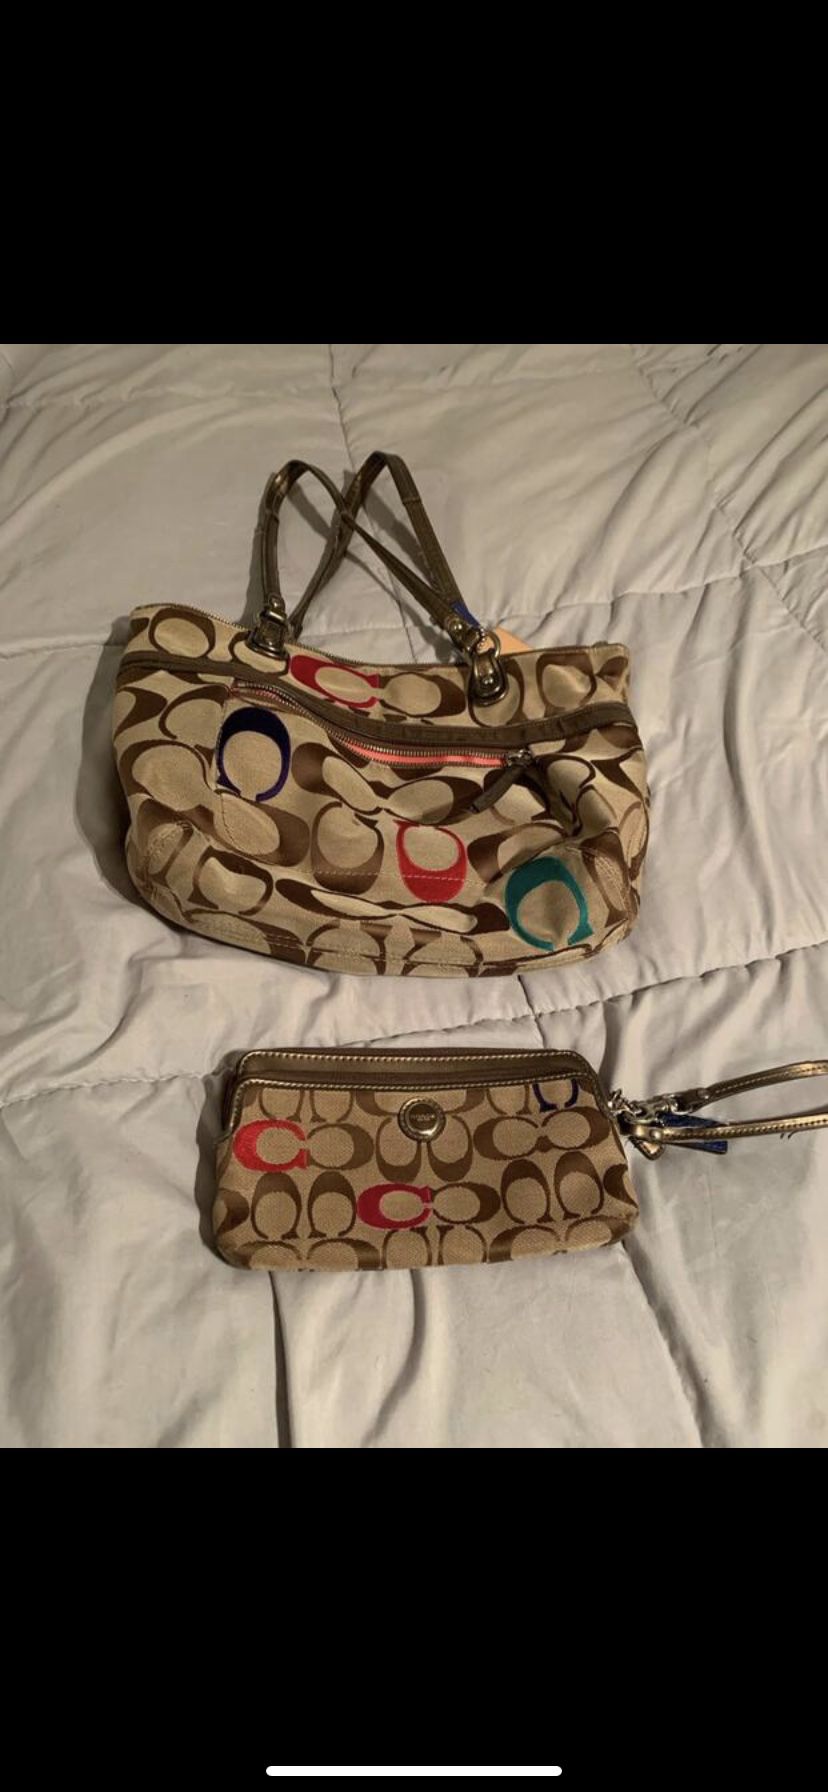 Authentic Coach Purse And Matching Wristlet 